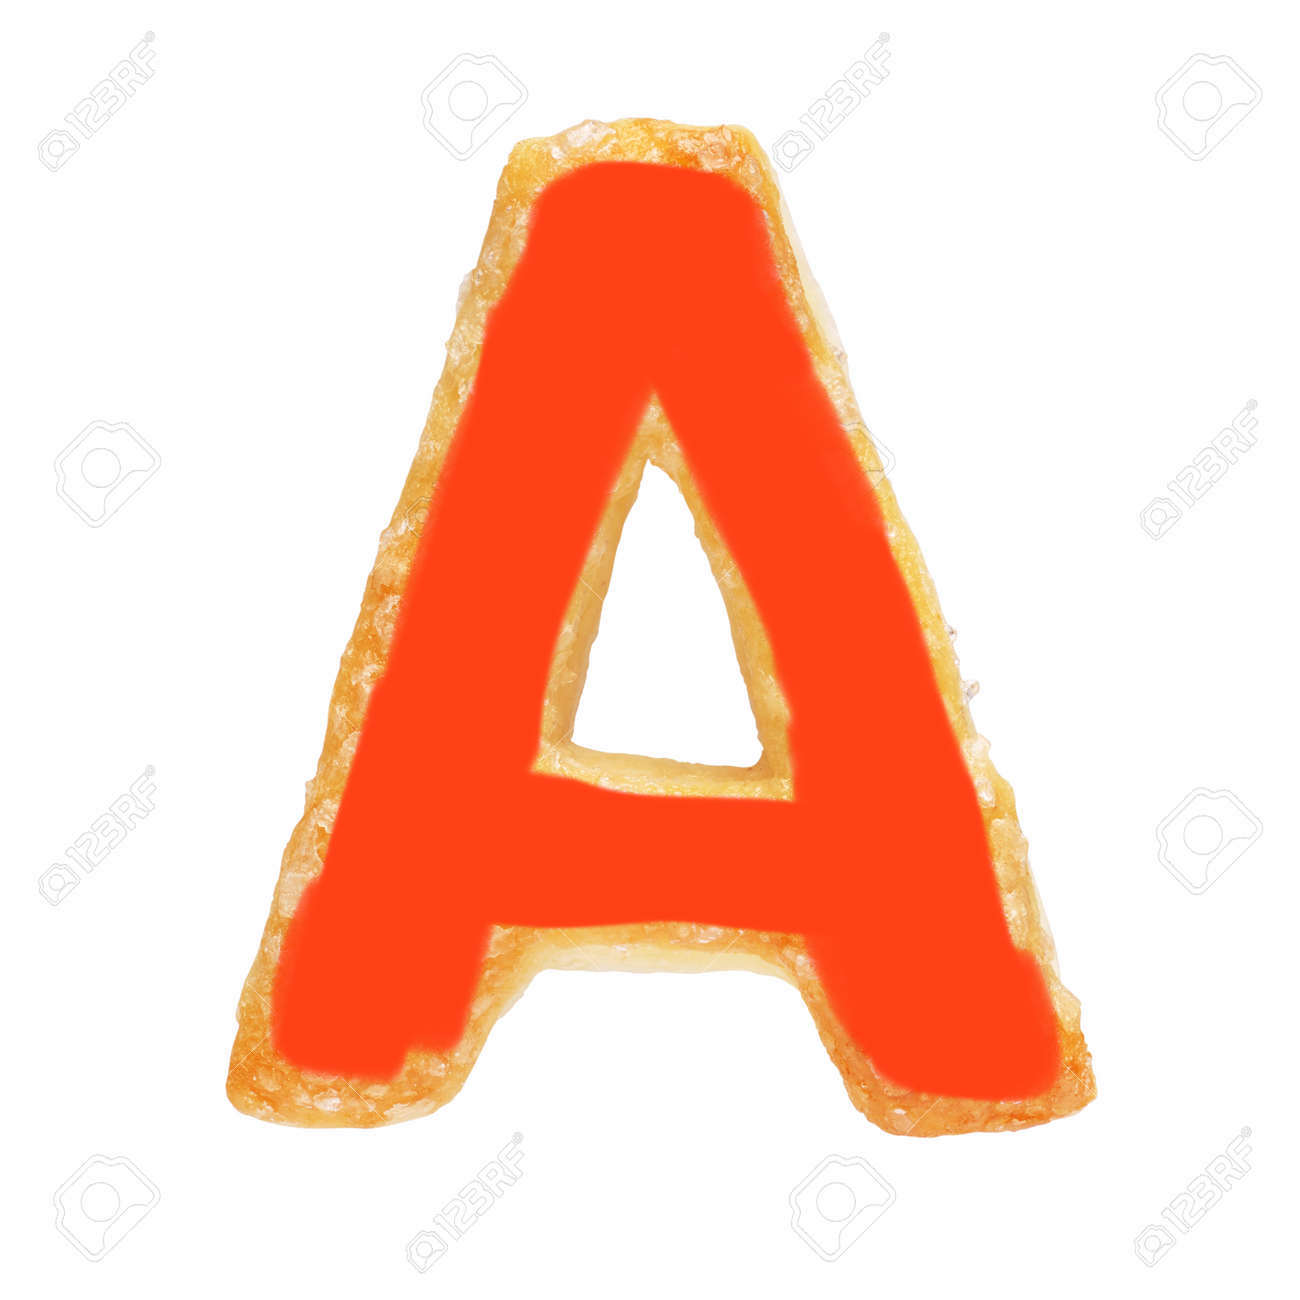  Letter A From Baked Dough Or Cookie